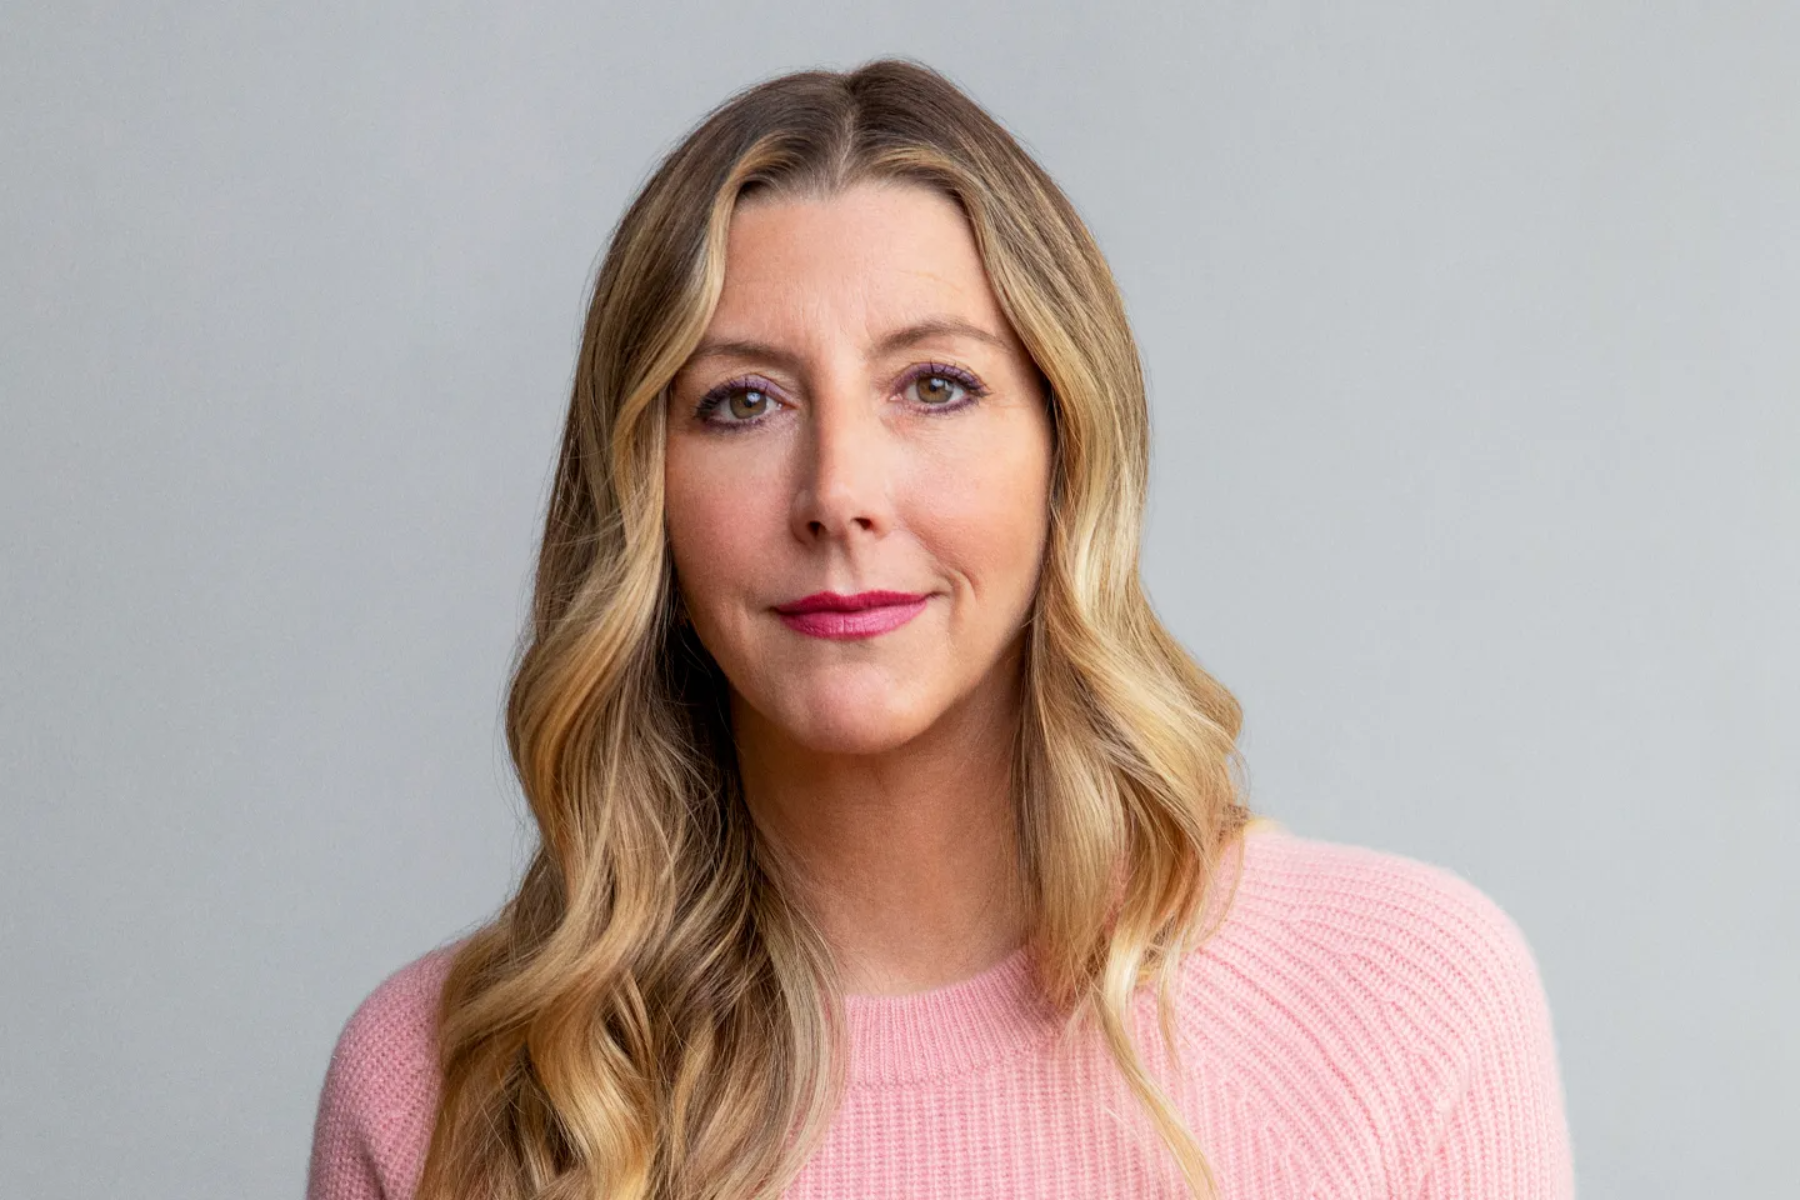 Spanx founder Sara Blakely bootstrapped for 21 years before selling in Nov 2021 that valued the company at at $1.2billion.